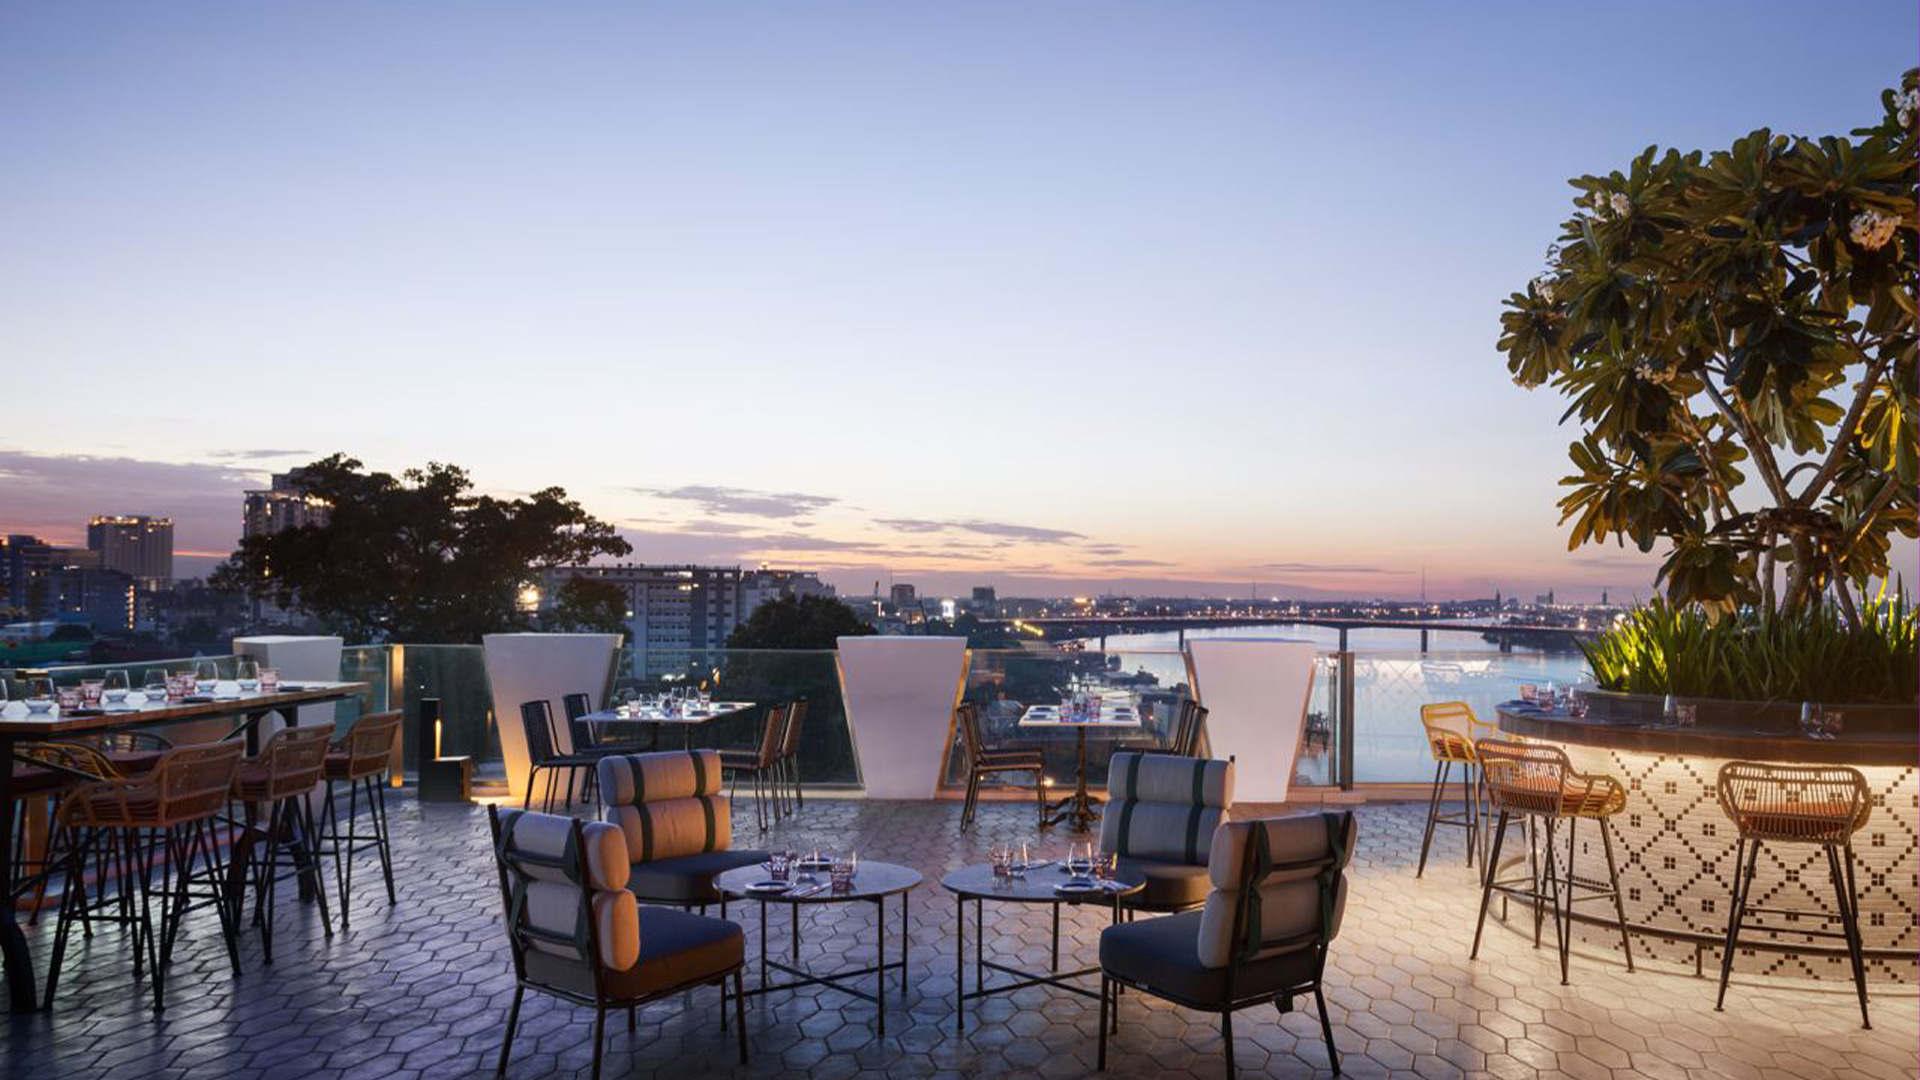 HEMISPHERE: Dine with style at this new Top-notch Skybar by the riverside